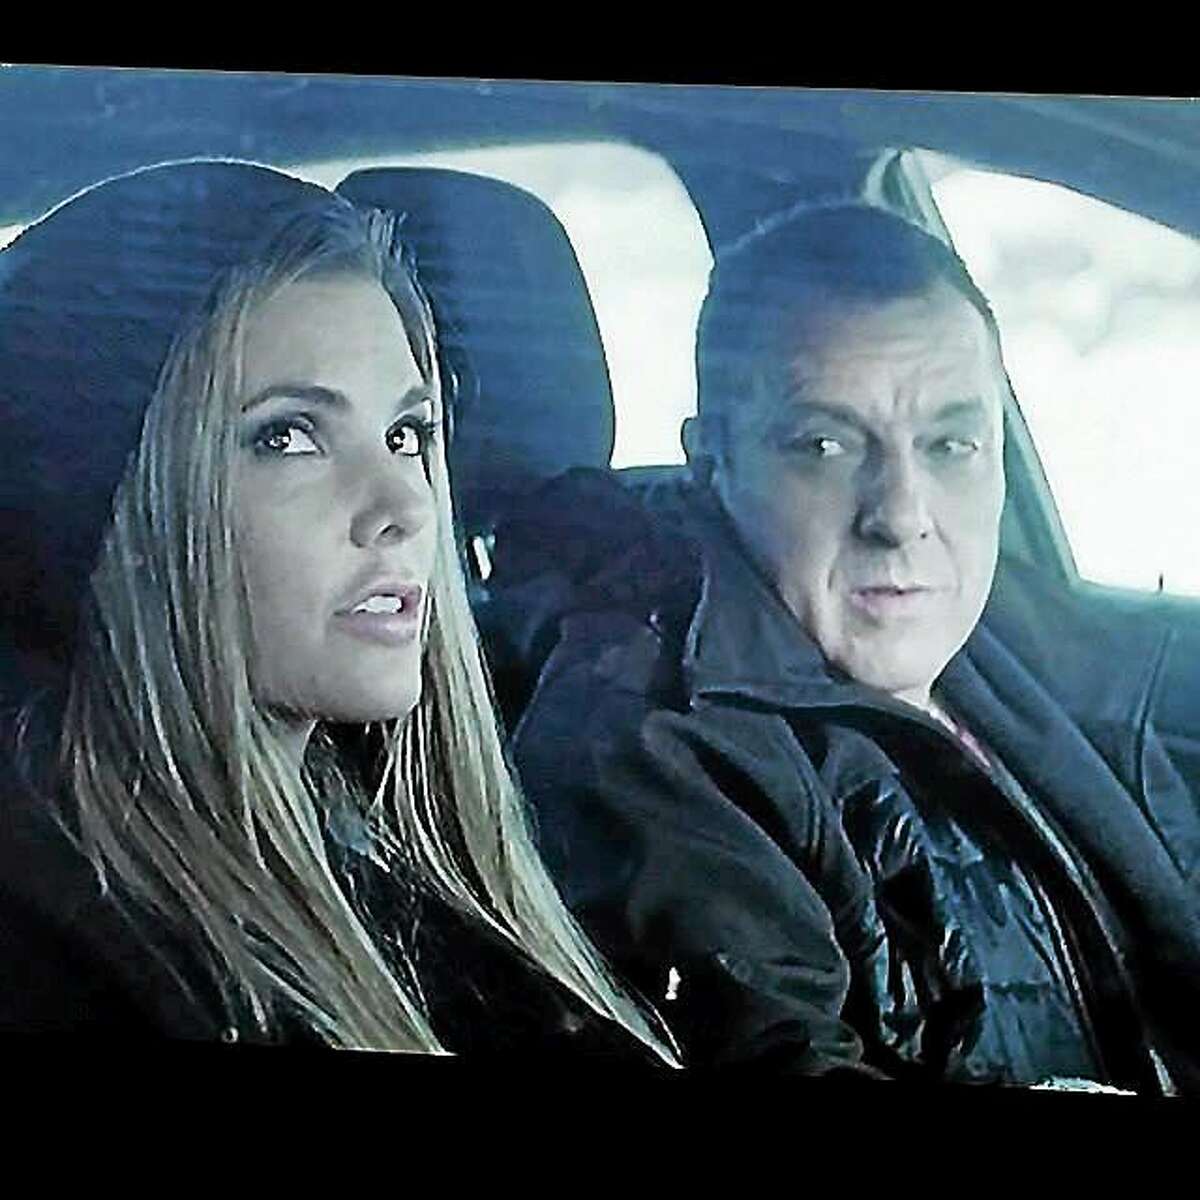 Actor Tom Sizemore and actress Nikki Moore are shown during a scene from the feature film, “Blue Line.”